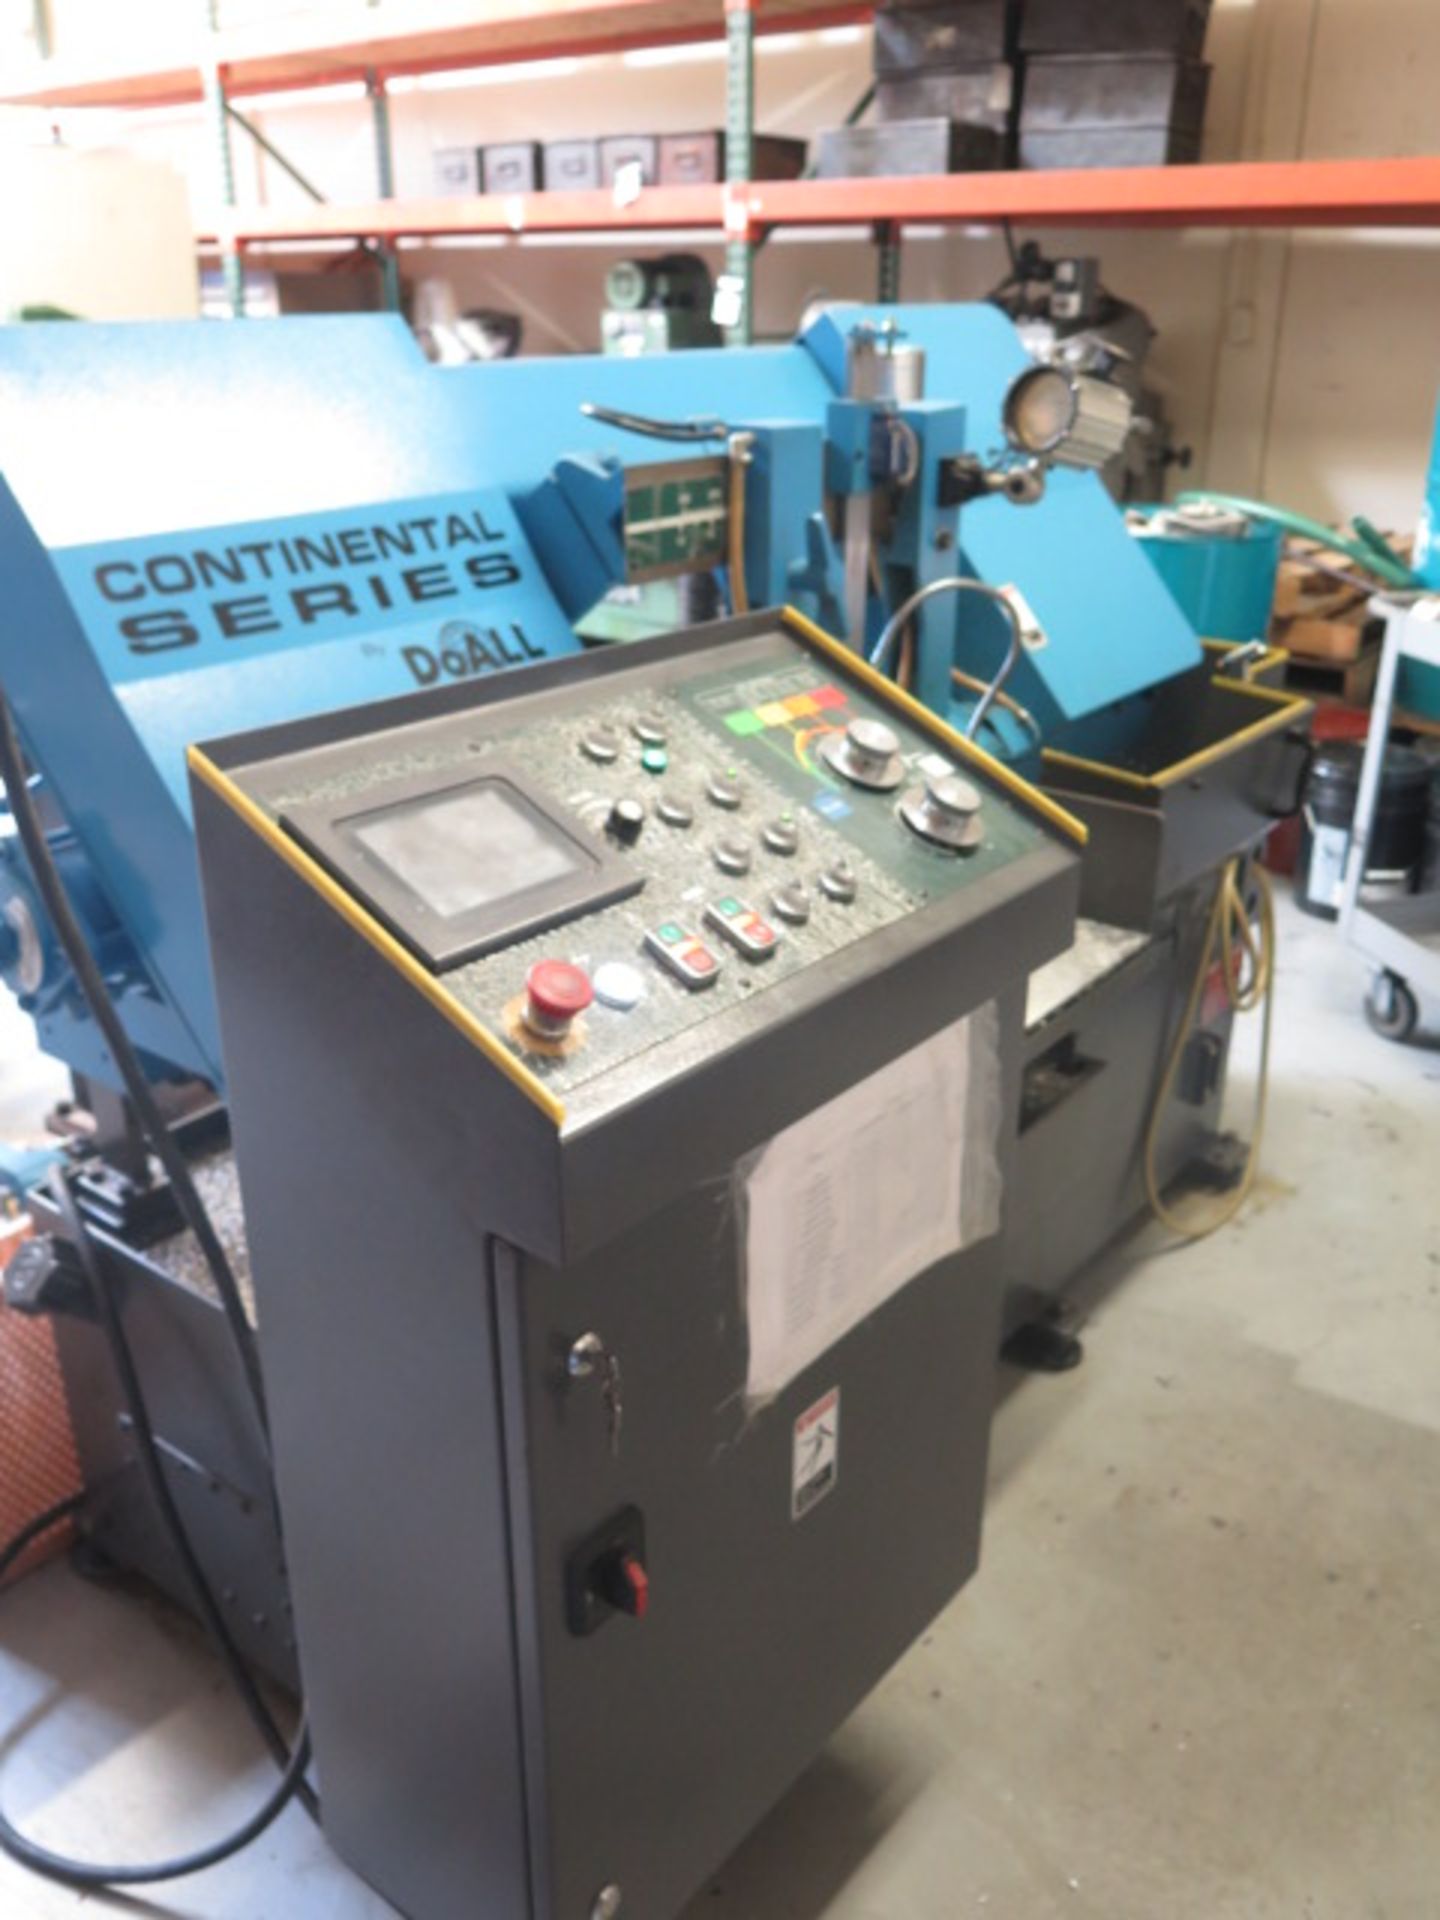 DoAll “Continental Series” mdl. DC-280NC 11” Automatic Hydraulic Horizontal Band Saw s/n 0300282 - Image 2 of 12